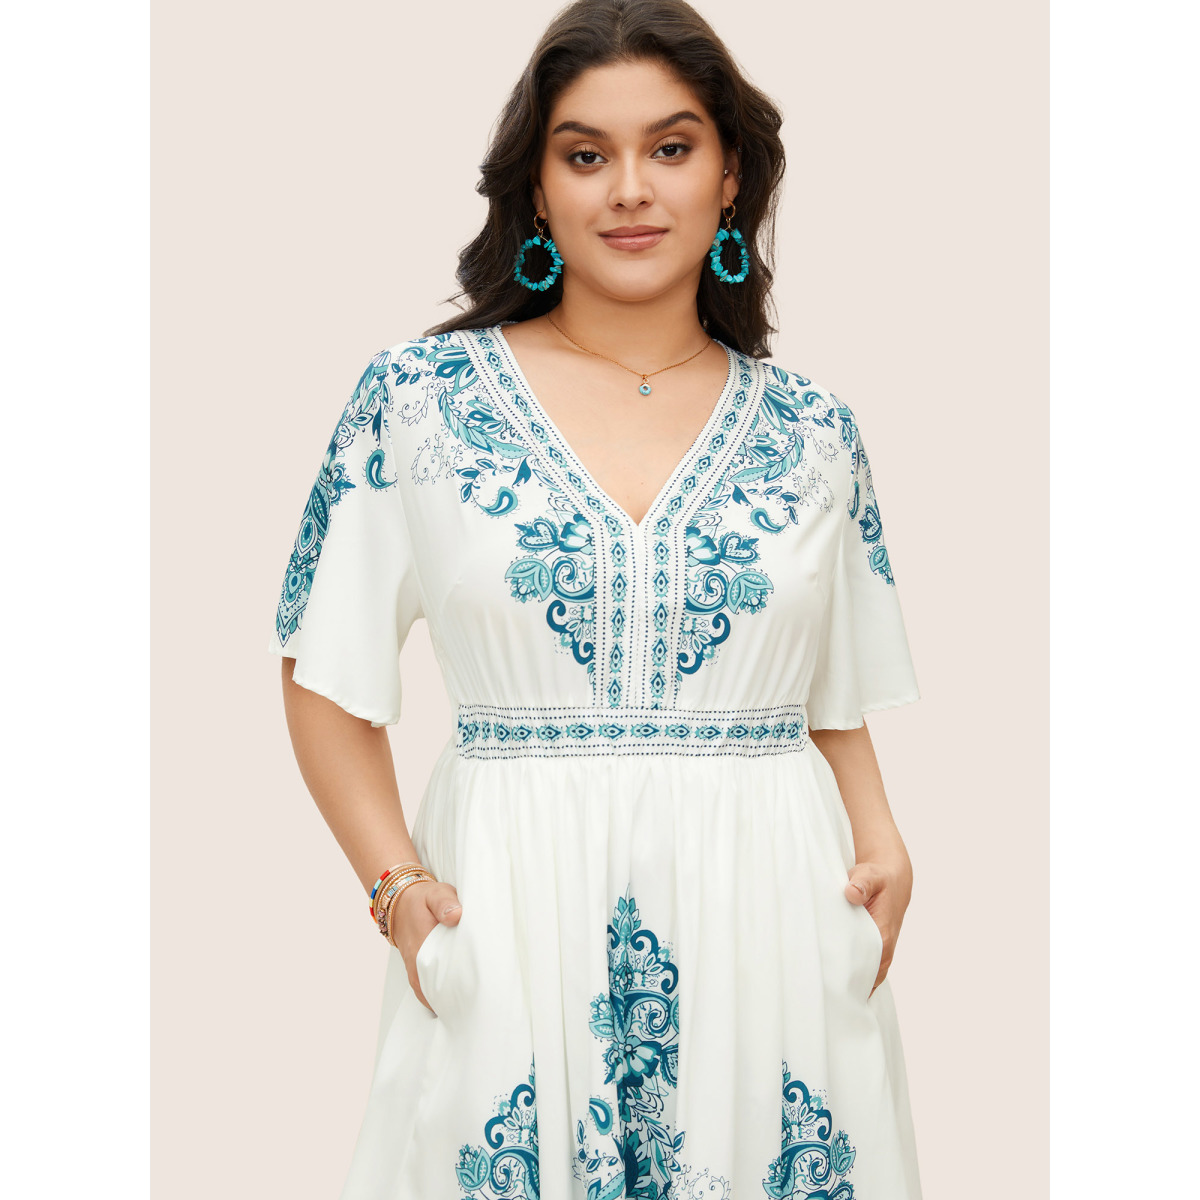 

Vintage Embroidered Floral Print Plus Size Vacation Dress Women Bohemian Emerald Pocket Ruffle Sleeve Short Sleeve V Neck Pocket Casual Knee Dress BloomChic